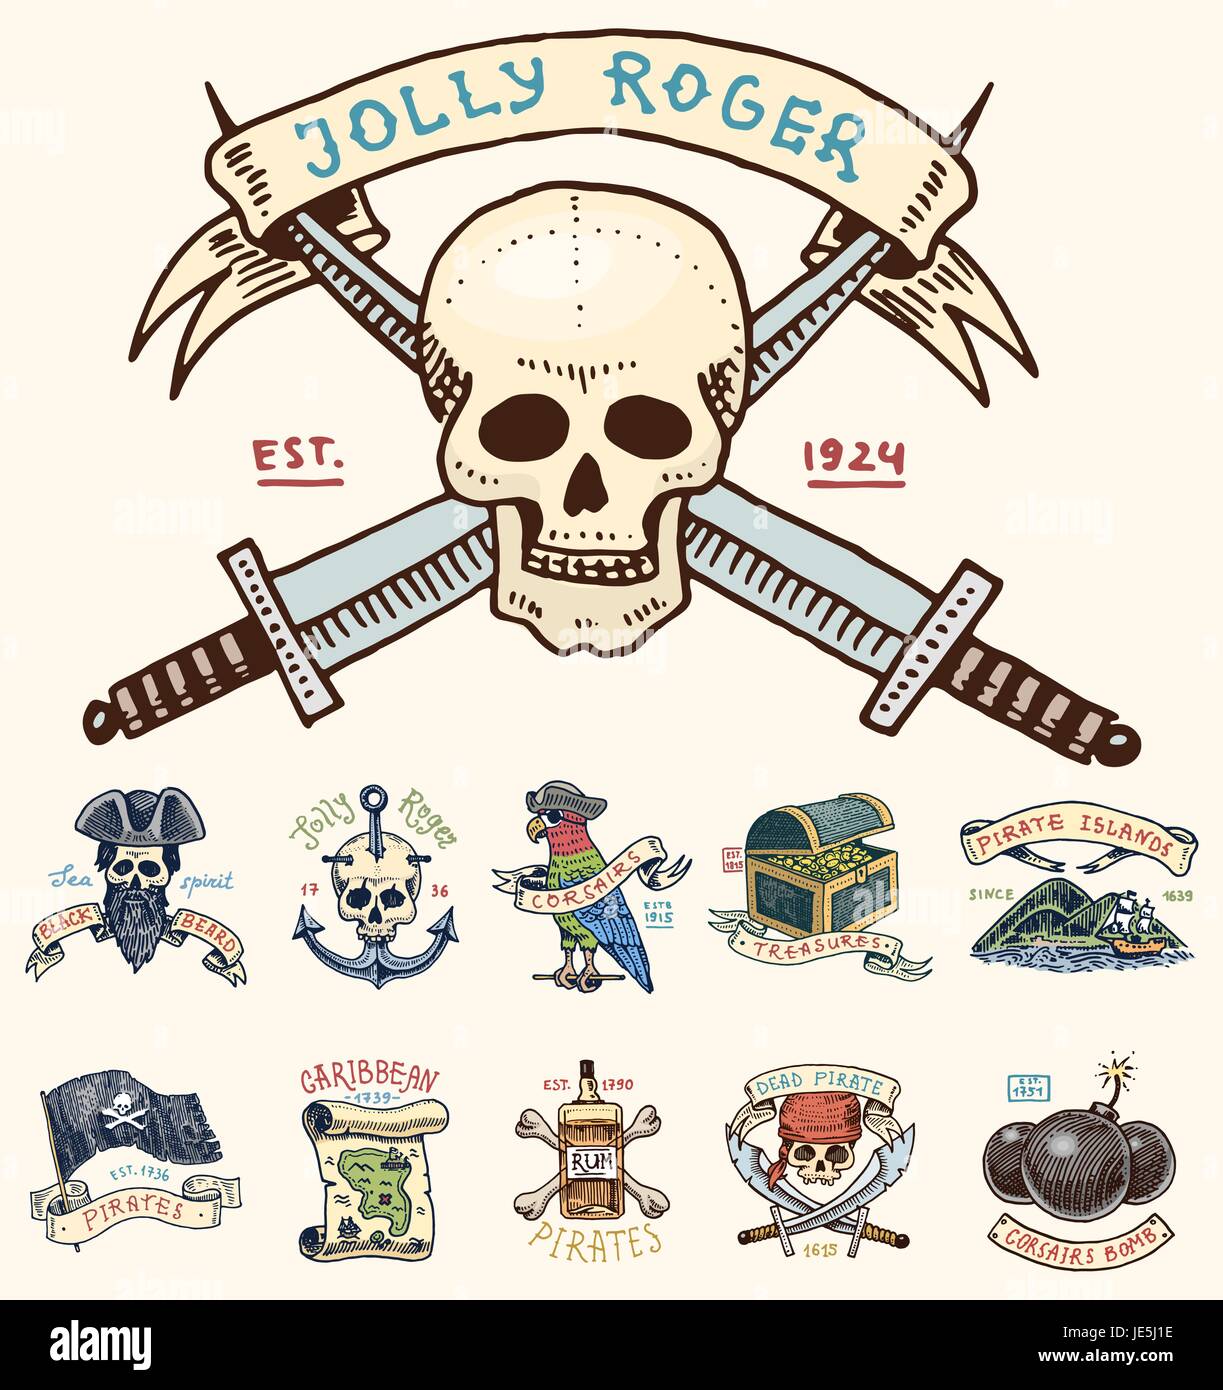 46 Jolly Roger Tattoos Collection